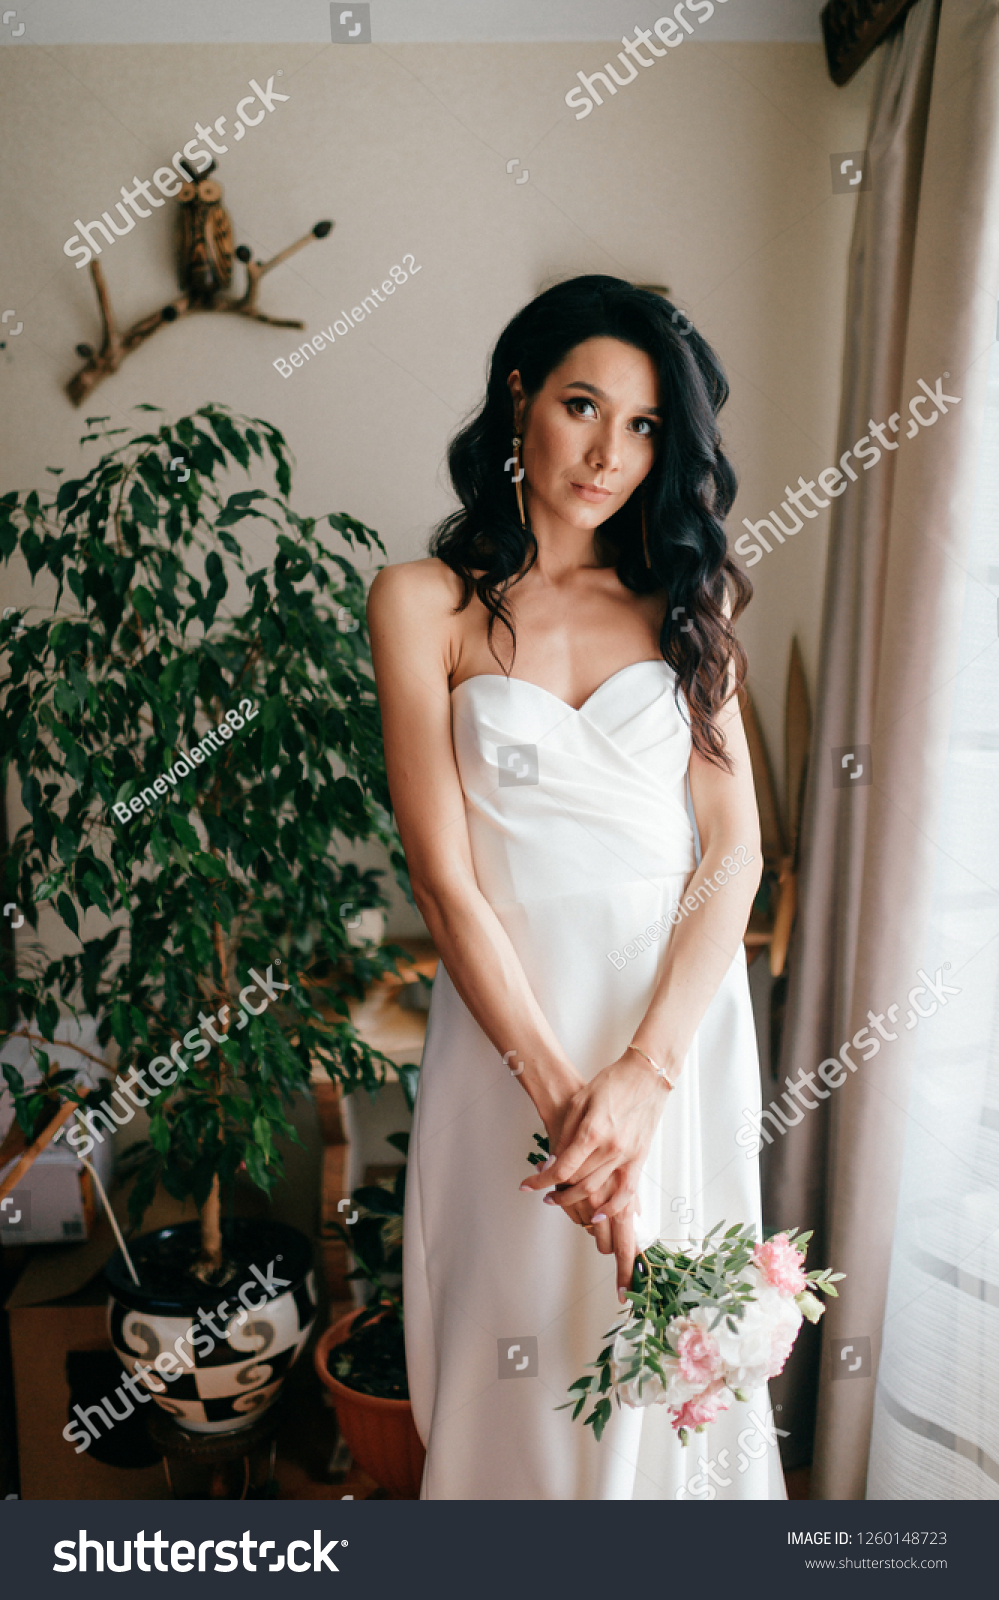 https://image.shutterstock.com/z/stock-photo-pretty-young-caucasian-bride-with-bouquet-of-flowers-posing-indoor-lovely-girl-with-spanish-1260148723.jpg